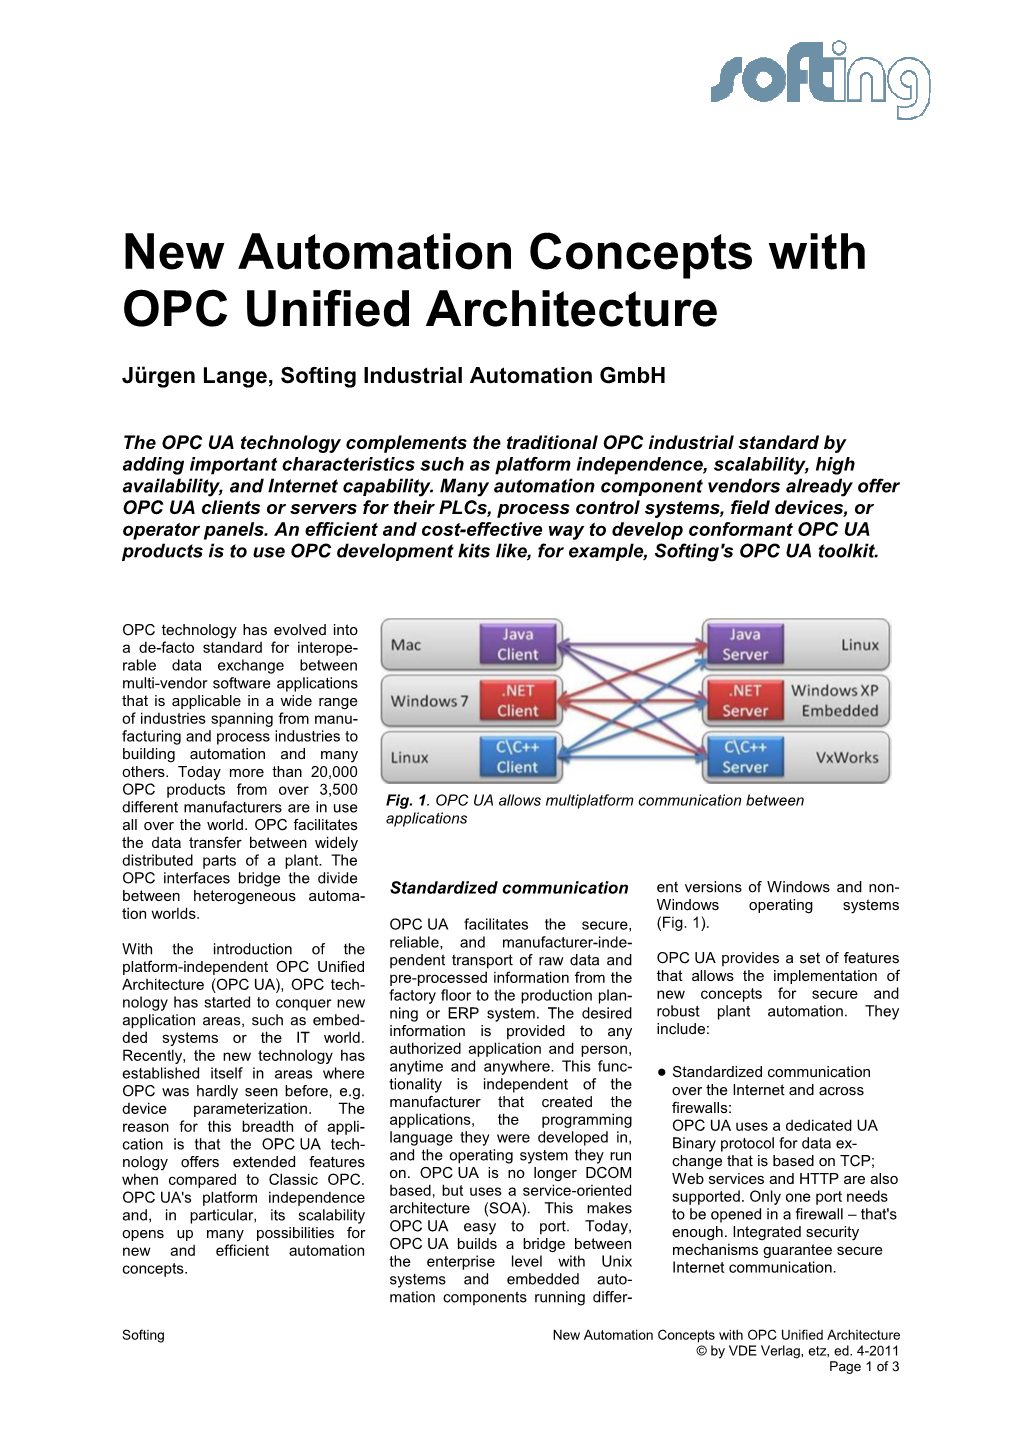 New Automation Concepts with OPC Unified Architecture